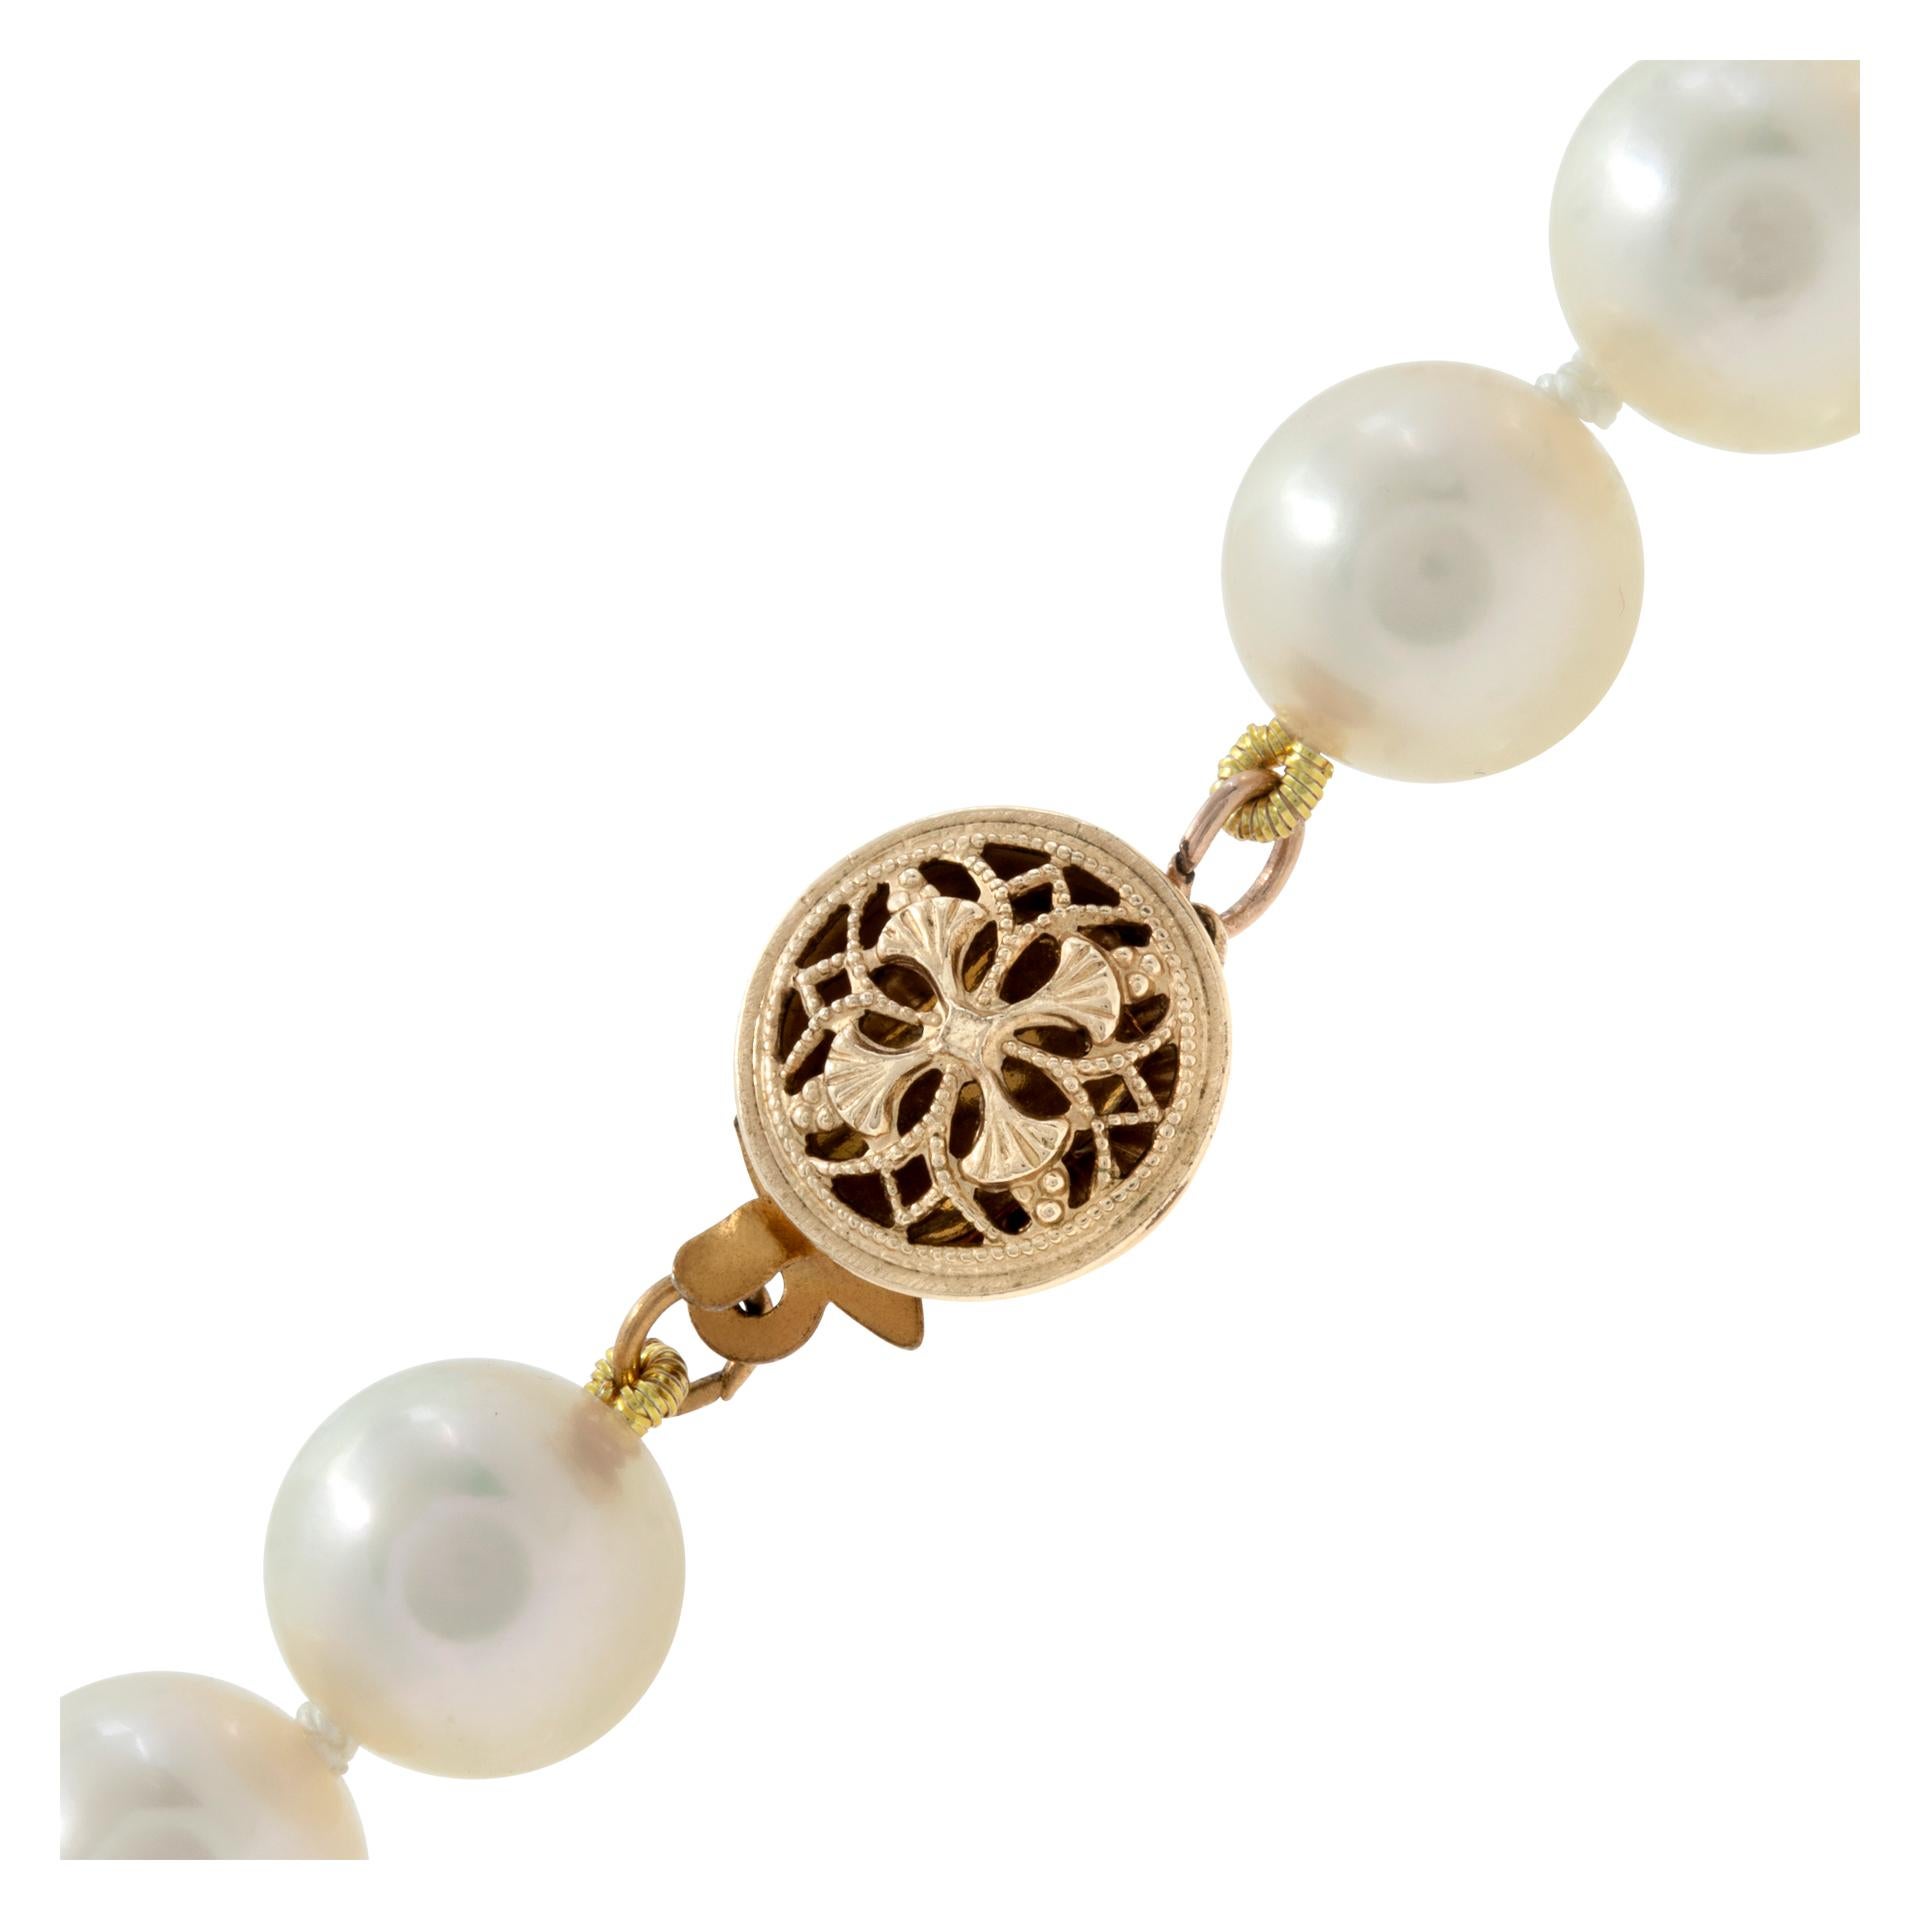 Opera length, strand of Akoya pearl necklace with 14kt yellow gold clasp. One hundred thirty three Akoya pearls are 7.5 x 8 mm. Length: 44  inches.
